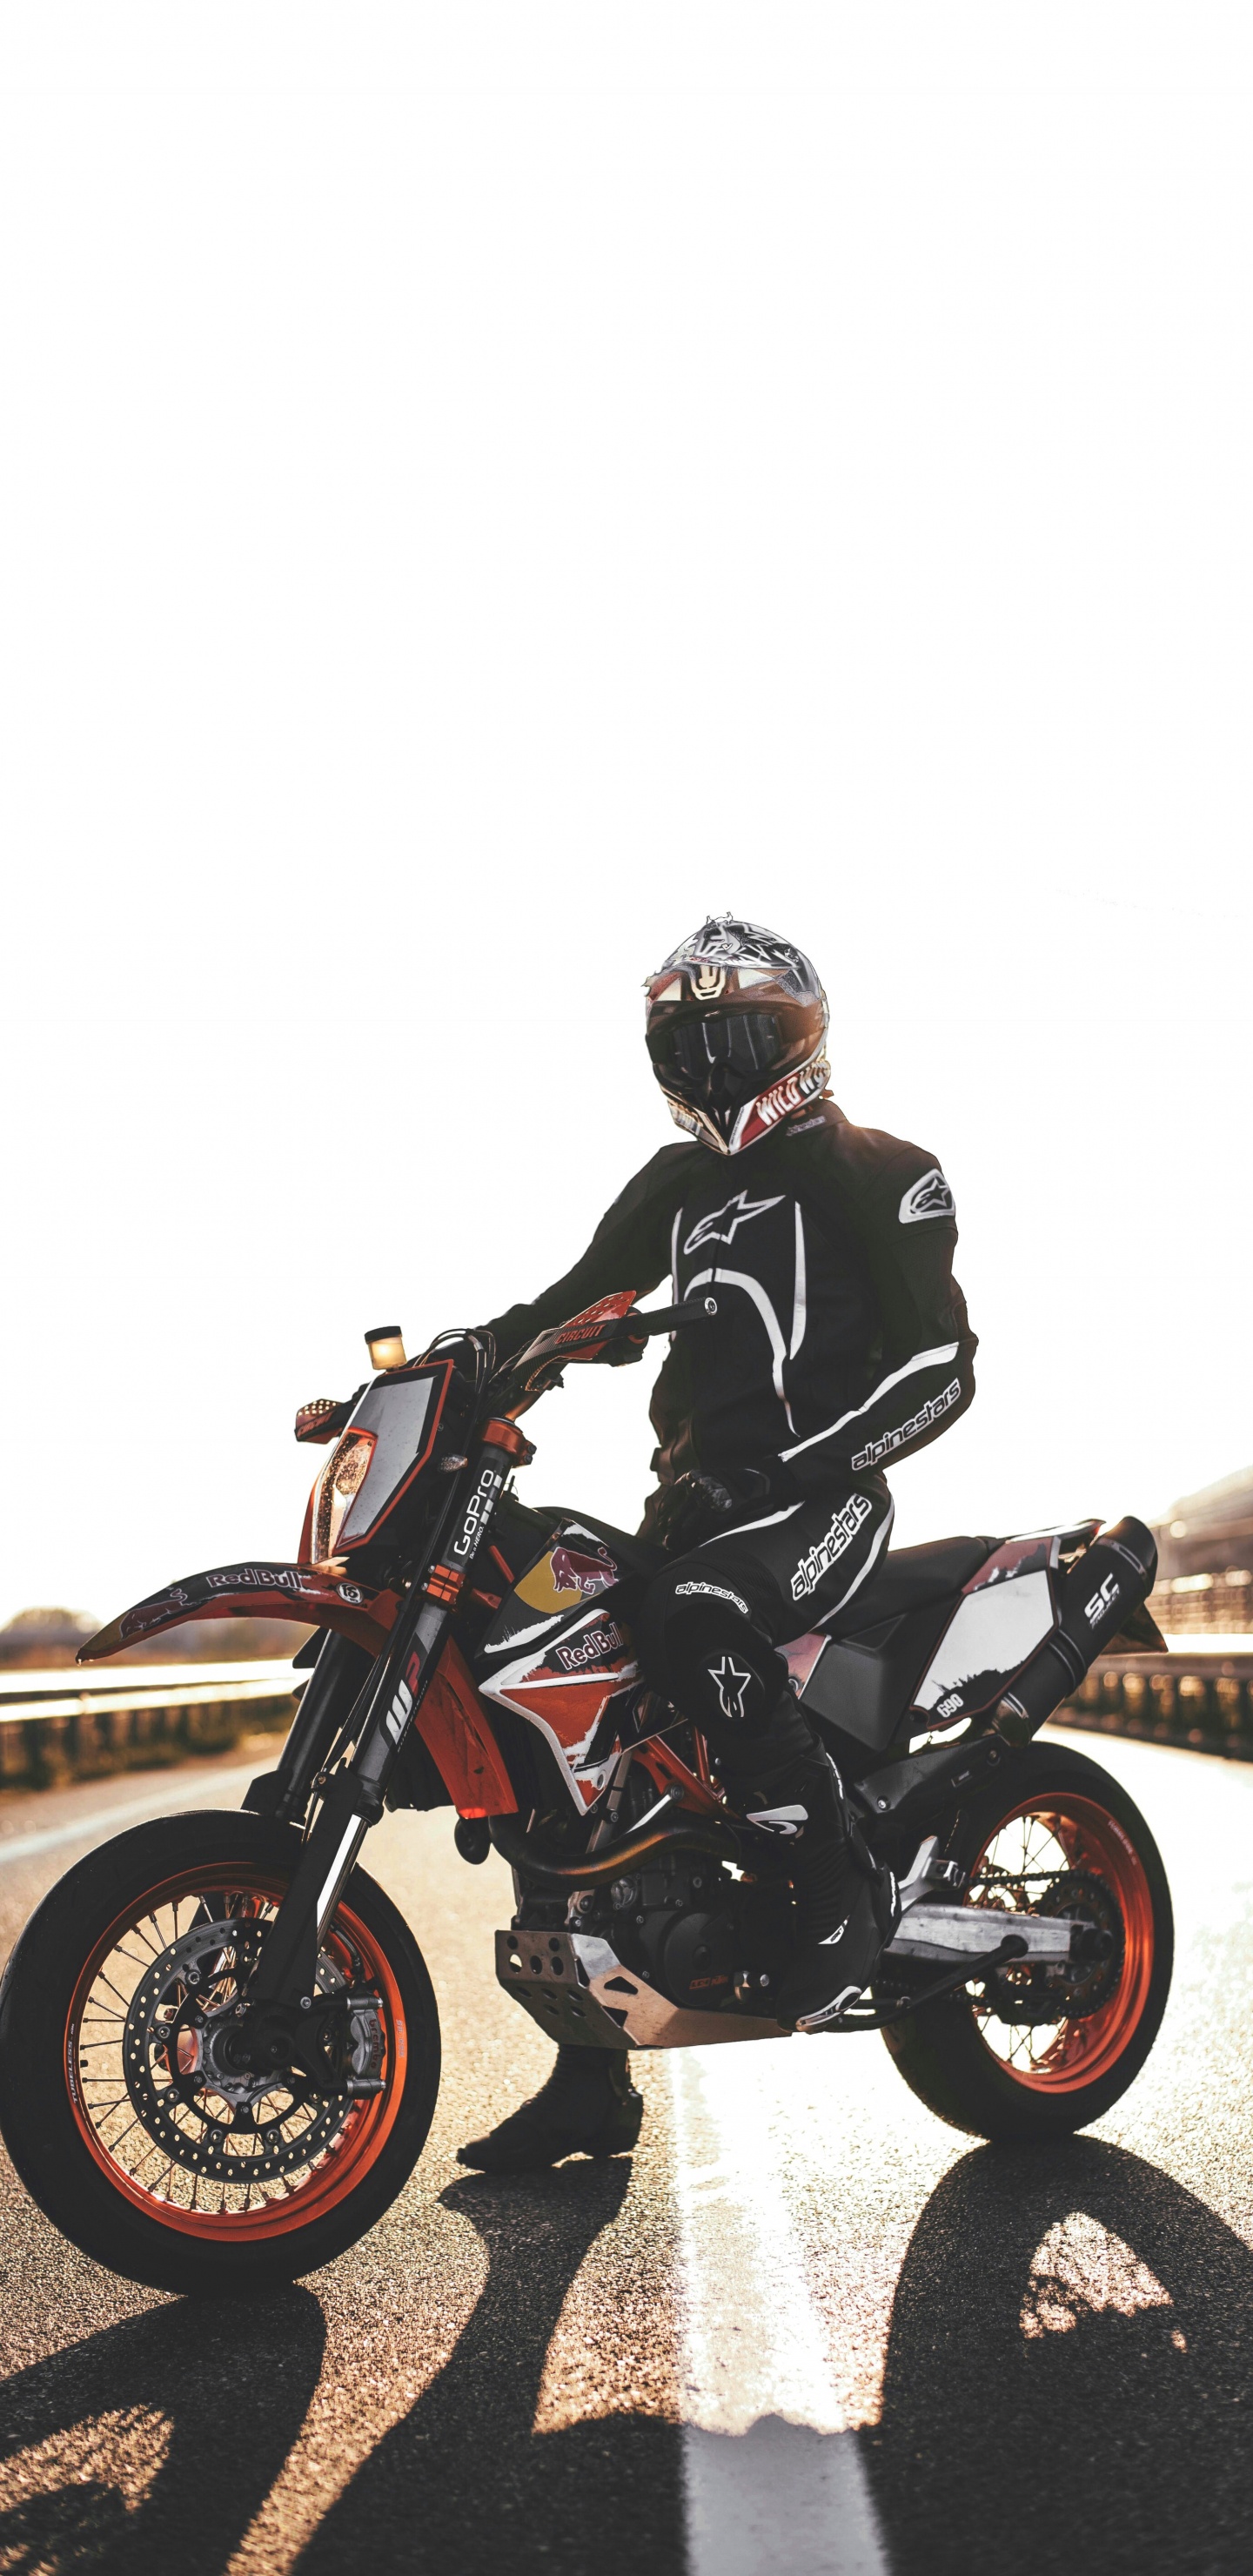 Man in Black Jacket Riding Motorcycle. Wallpaper in 1440x2960 Resolution